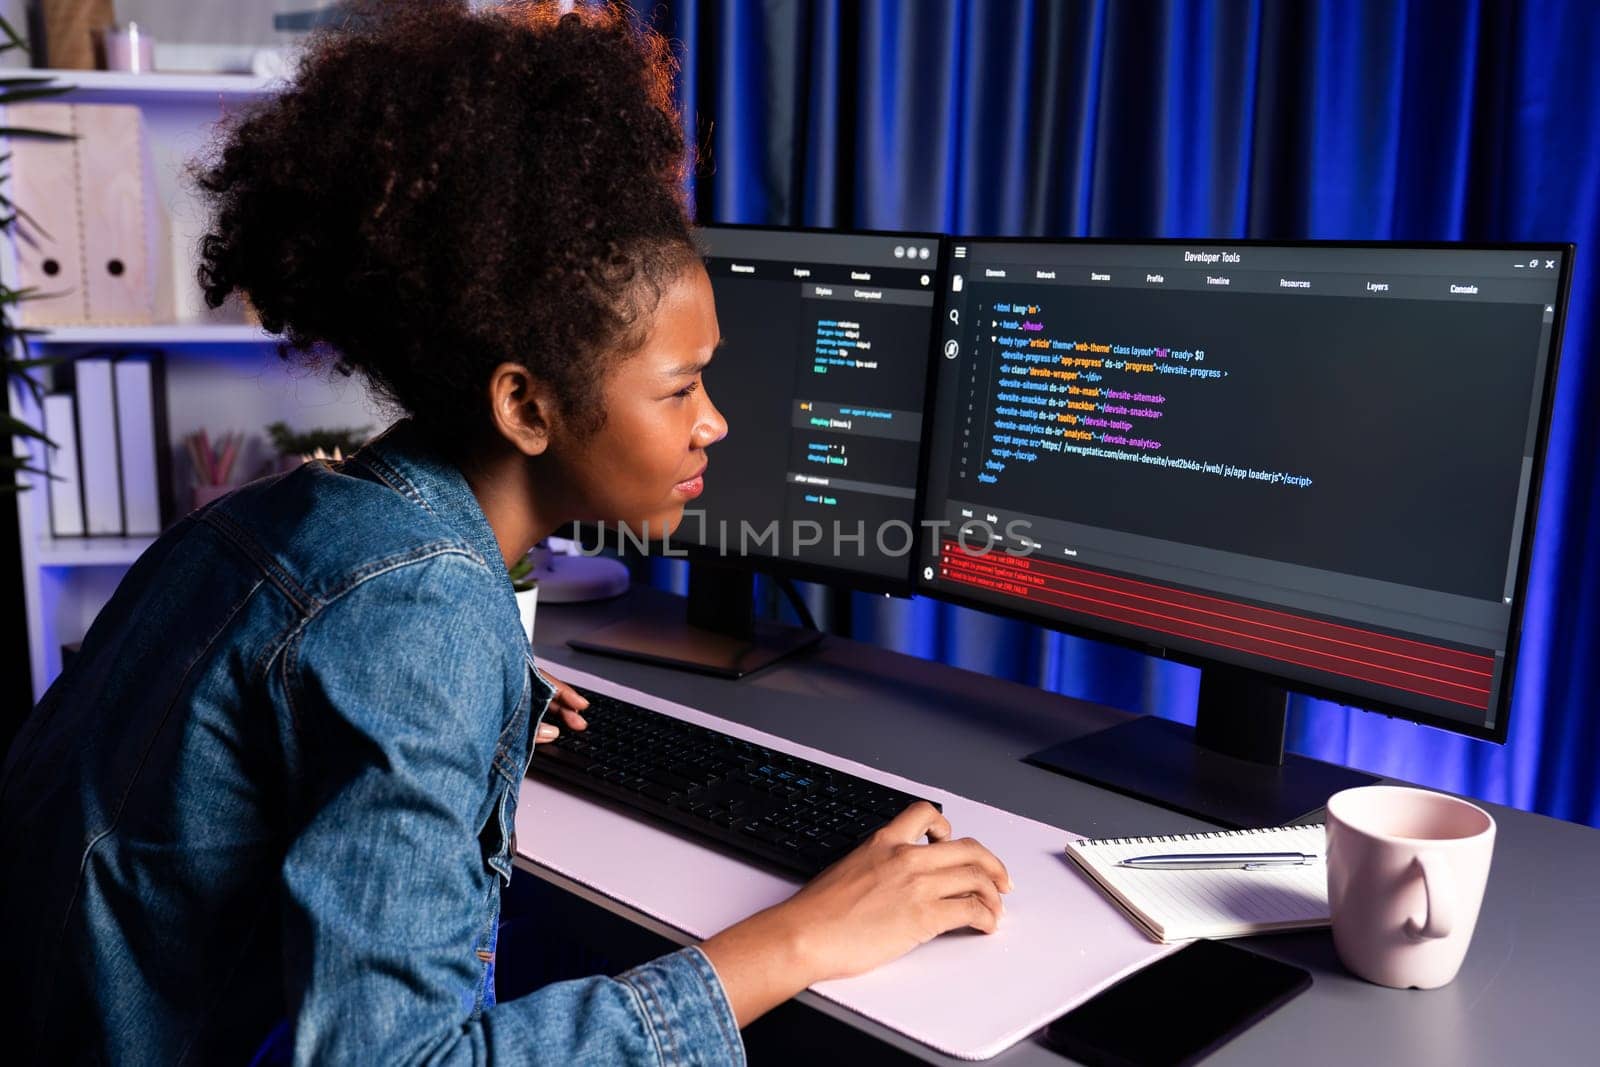 Young African IT professional developer wearing jeans shirt cheeking cyber code, concentrate on laptop screen, display data of application and website, create innovative updated version. Tastemaker.